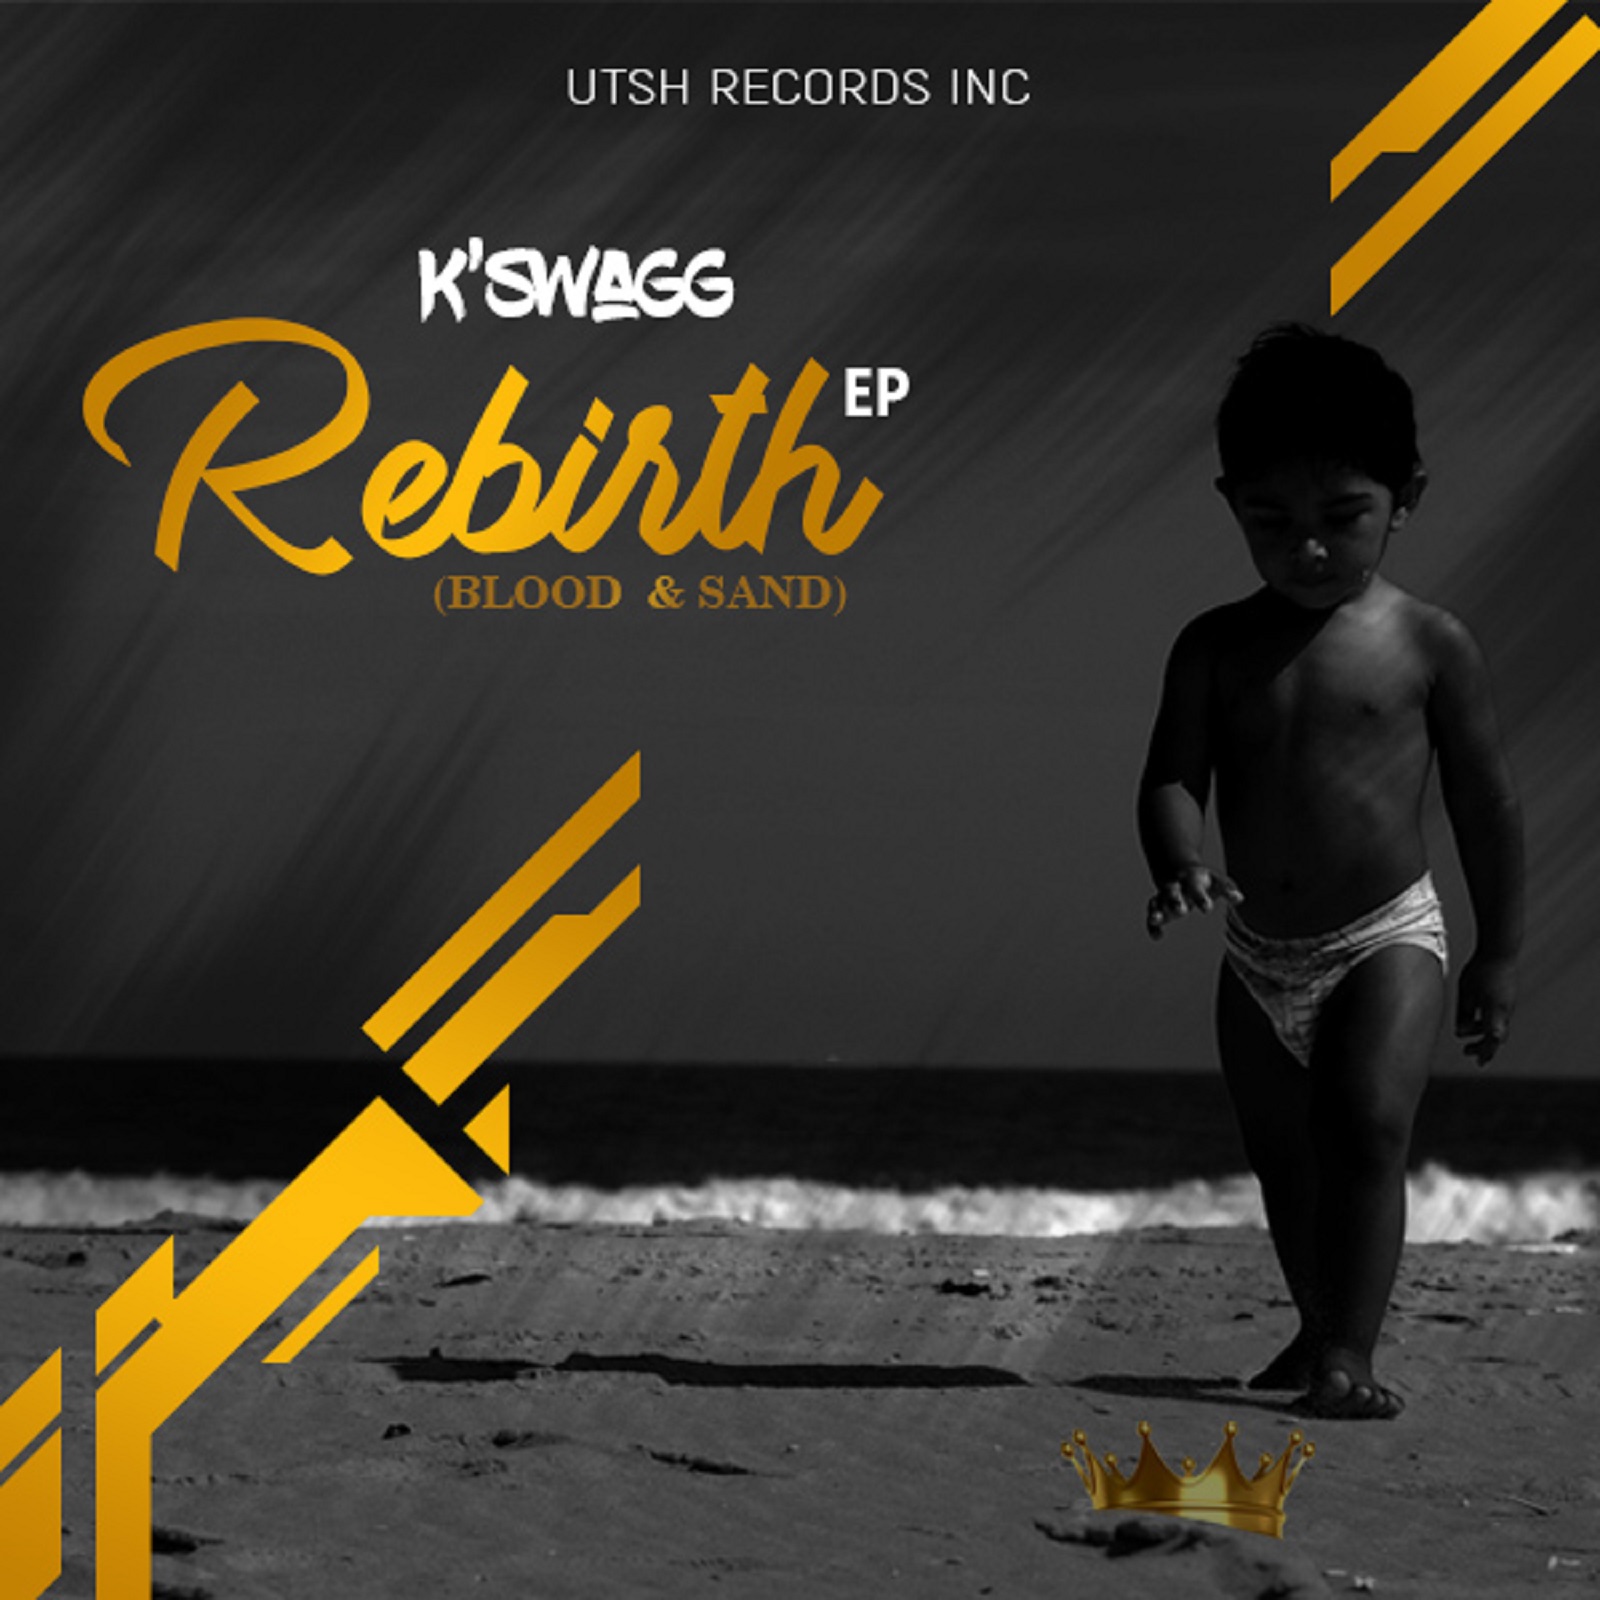 Rebirth EP by K'Swagg